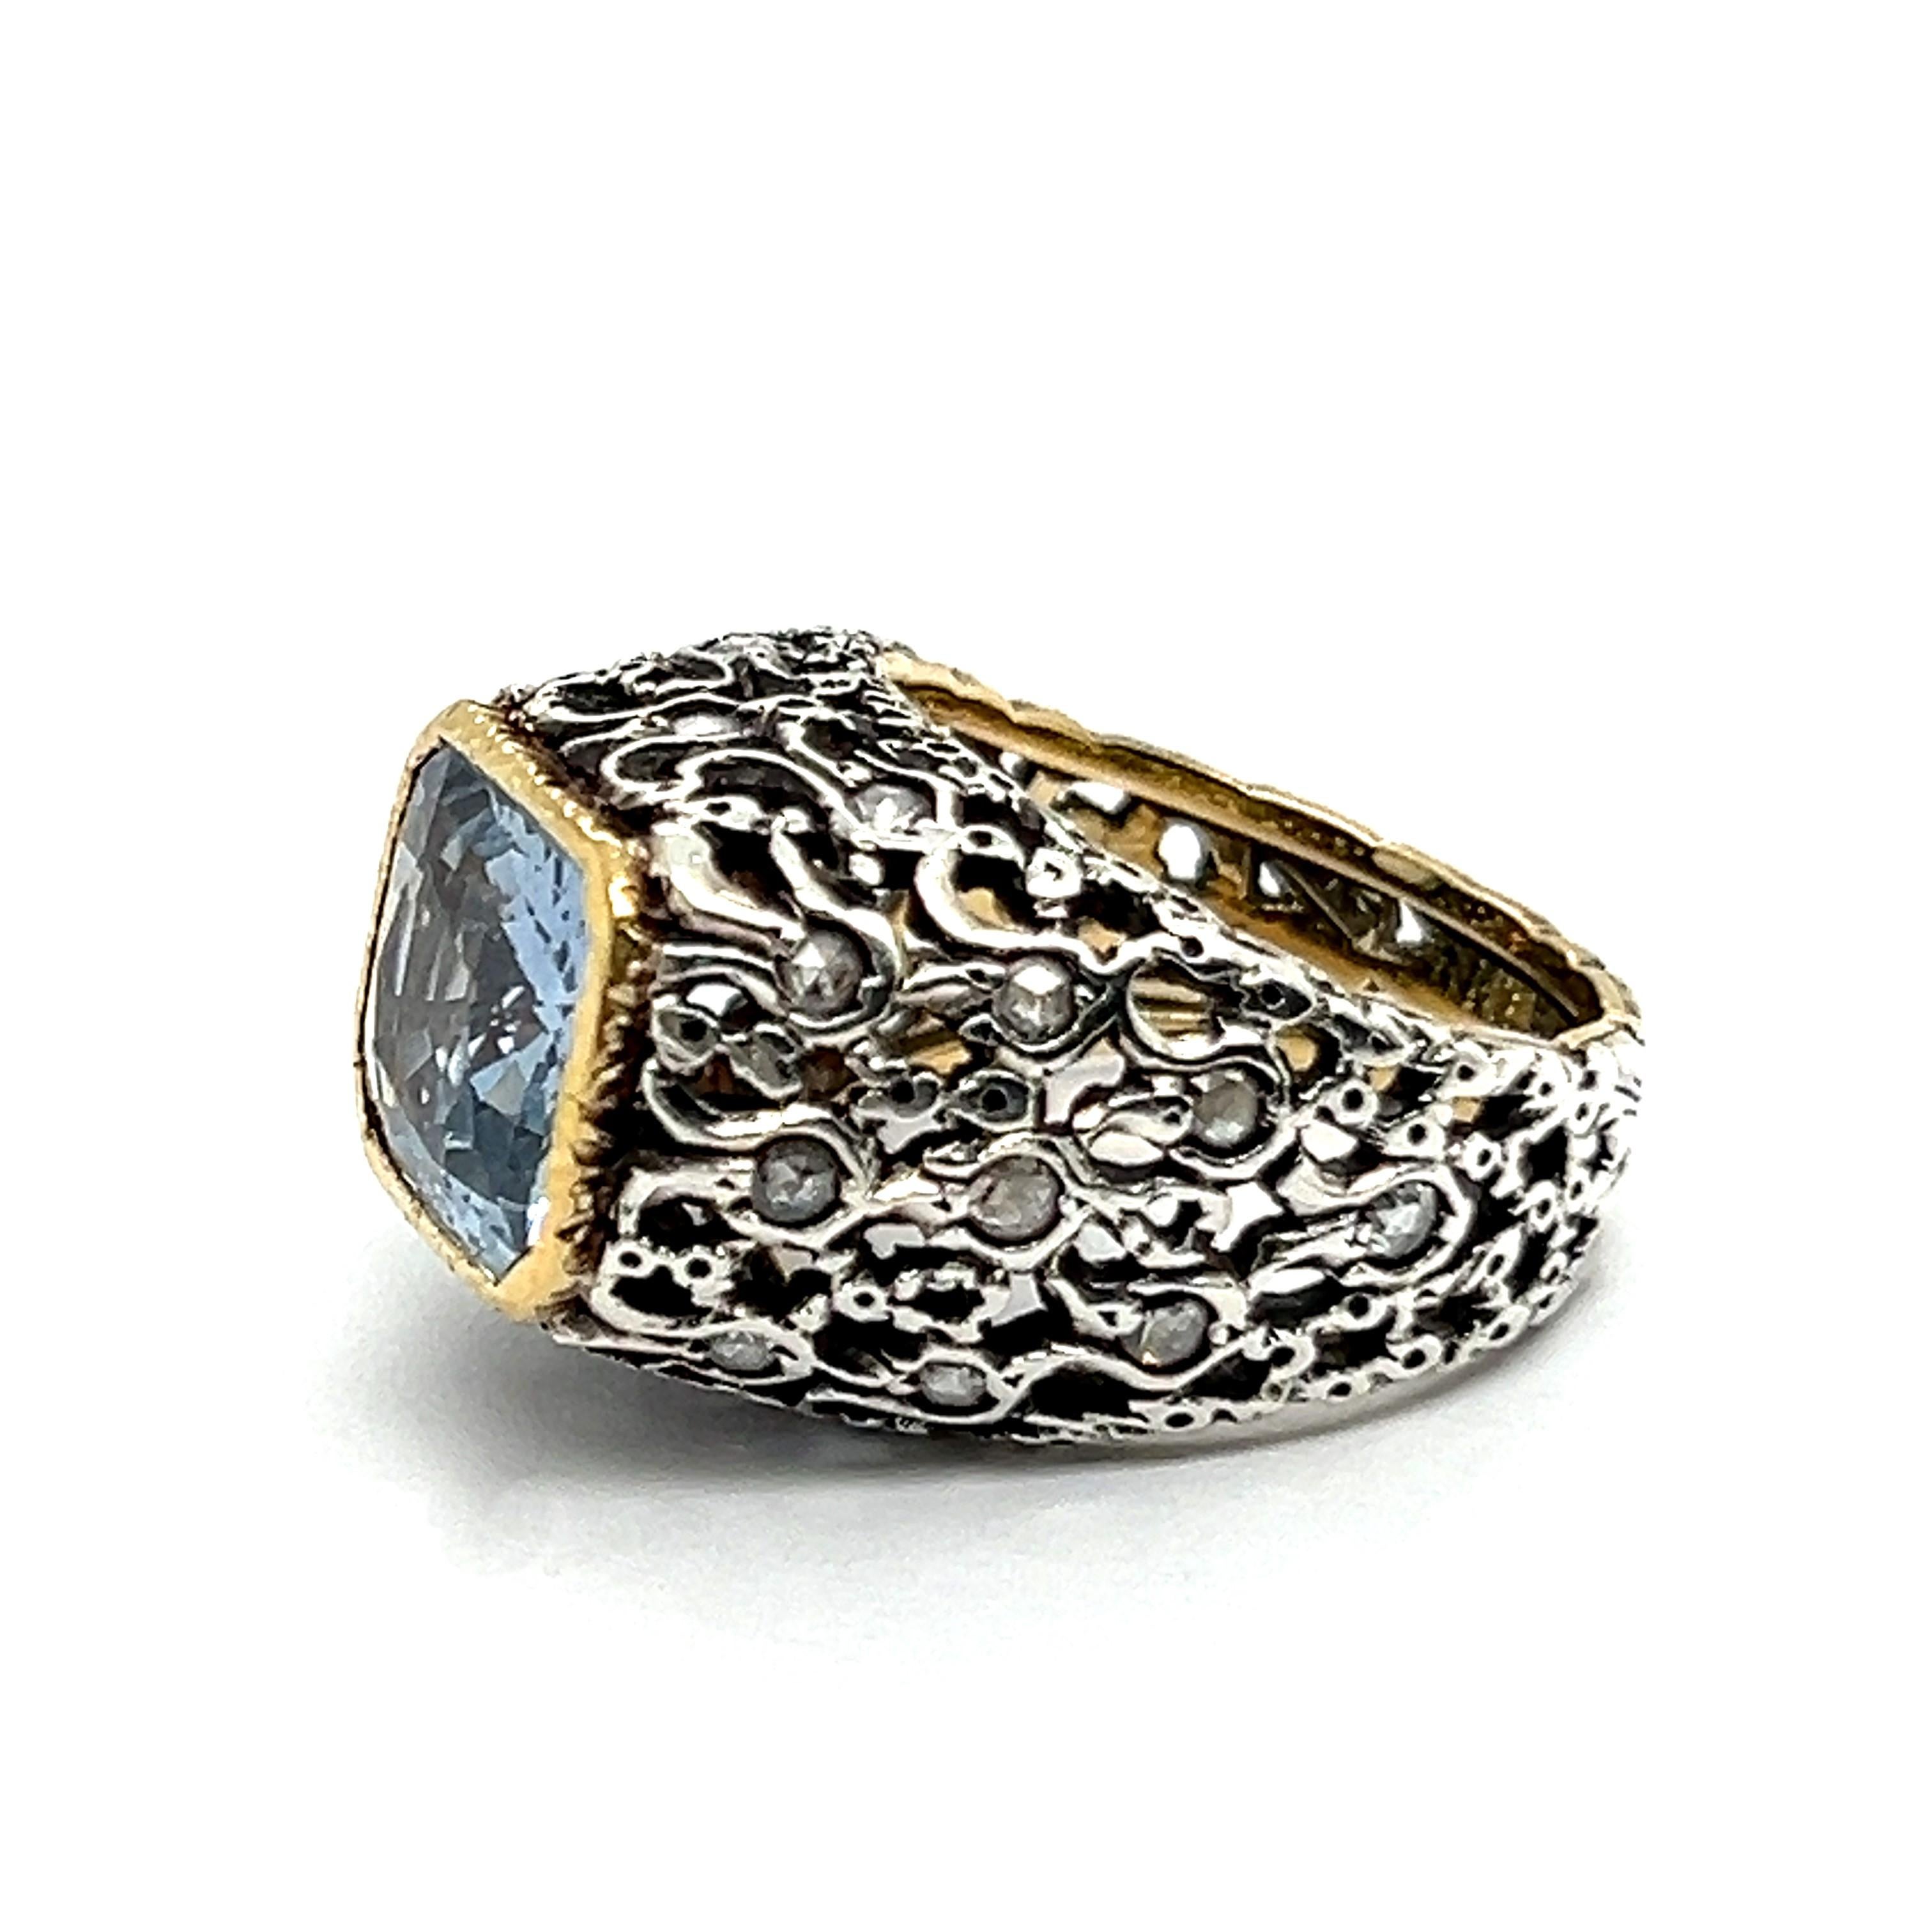 Women's or Men's Sapphire and Diamonds Ring in Silver & 18 Karat Yellow Gold by Mario Buccellati